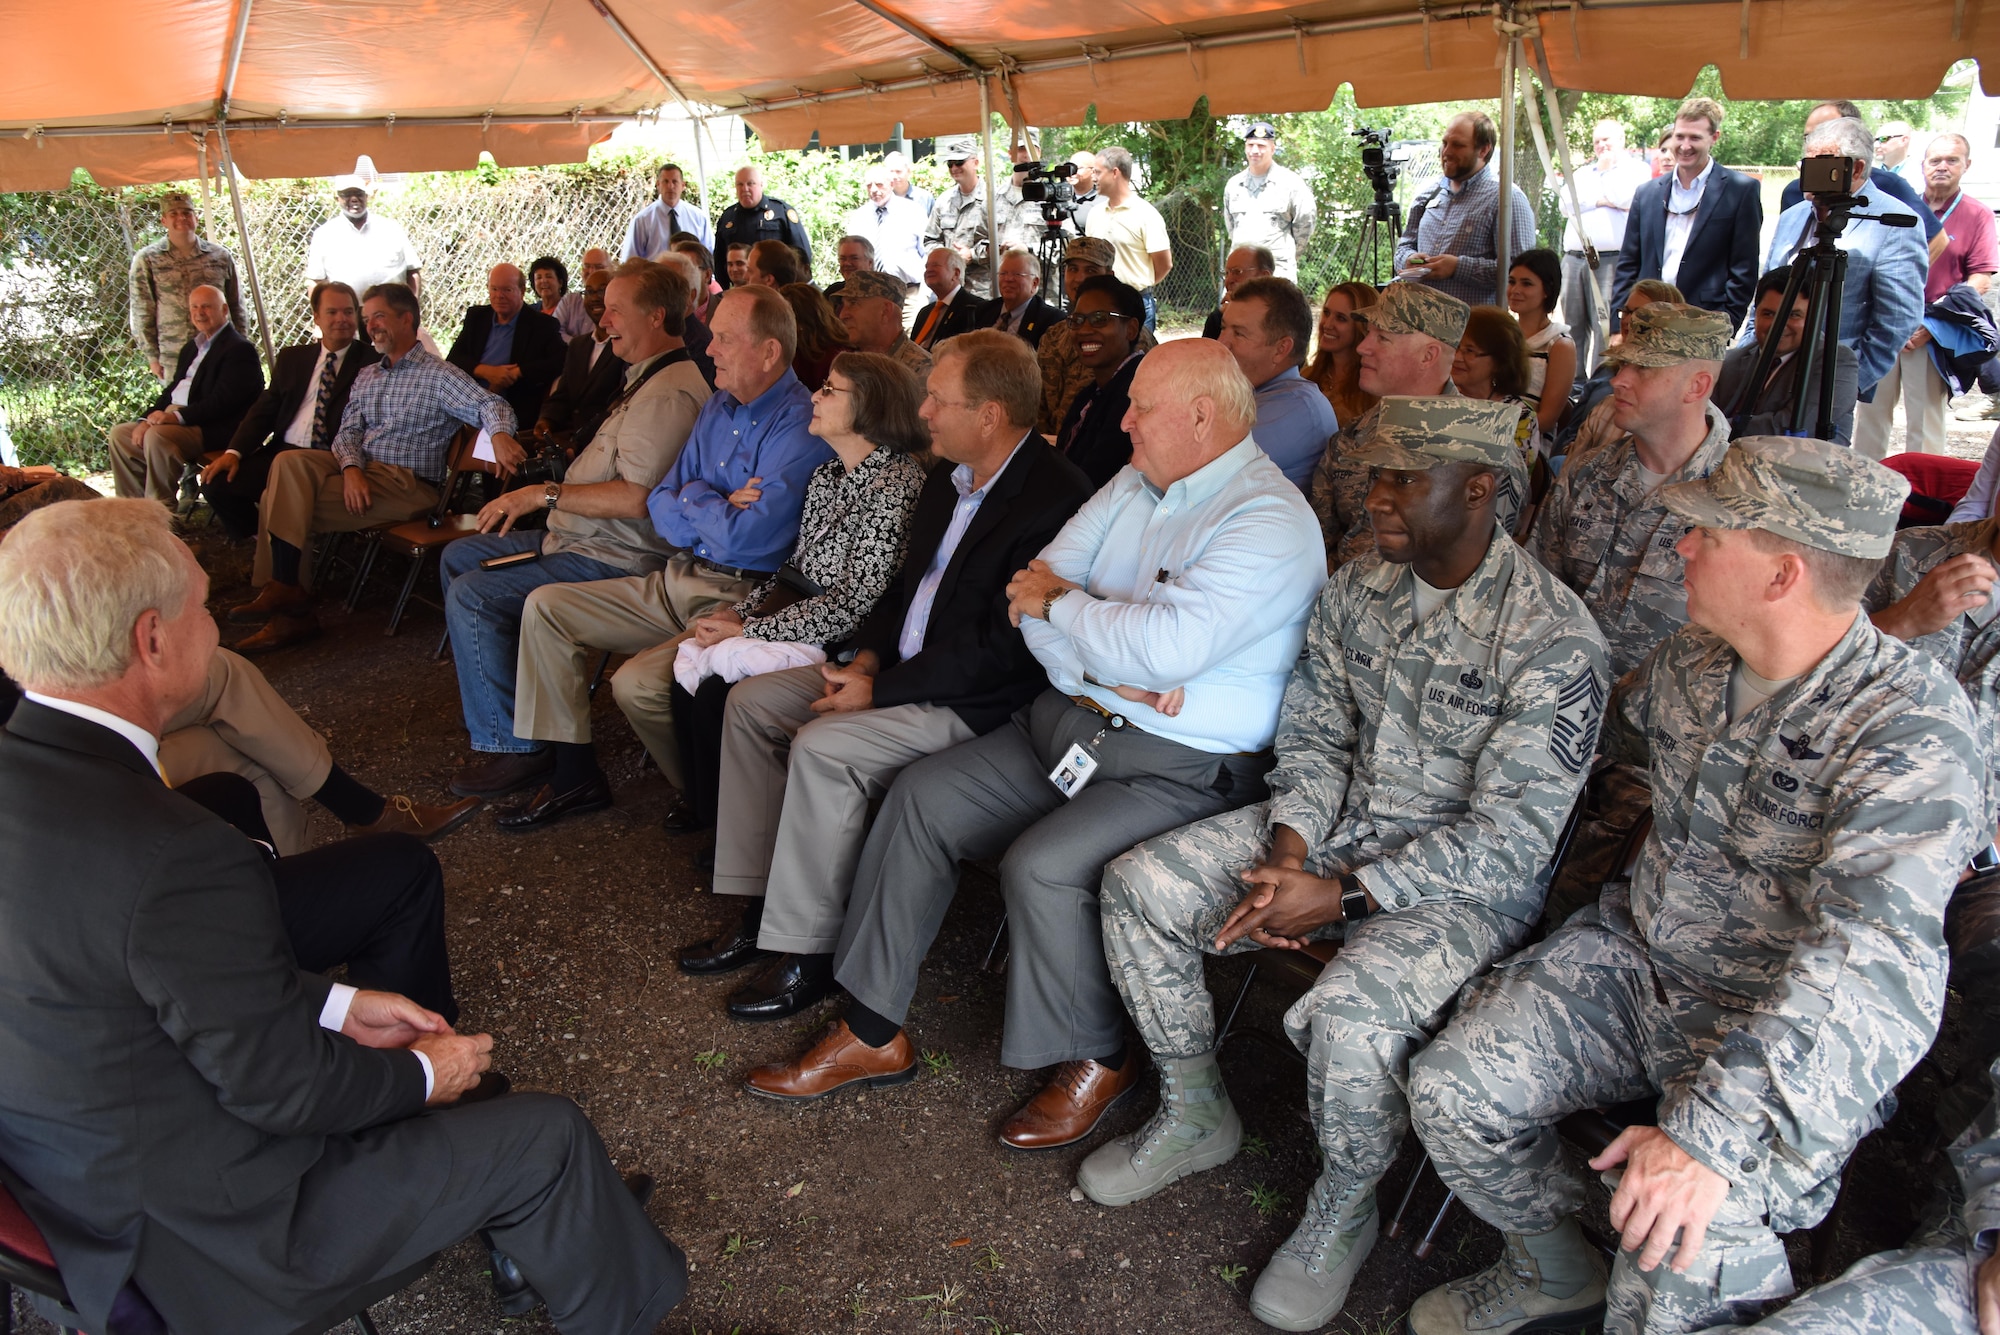 Local, state and federal officials and Keesler Air Force Base leaders attend the Keesler main gate announcement June 1, 2017, in Biloxi, Miss. The event announced an estimated $37 million project to locate a new main entry gate at Division St. and Forrest Ave. The two-year project includes an expanded and enhanced boulevard along Division St. from I-110 to Forrest Ave. (U.S. Air Force photo by Kemberly Groue)